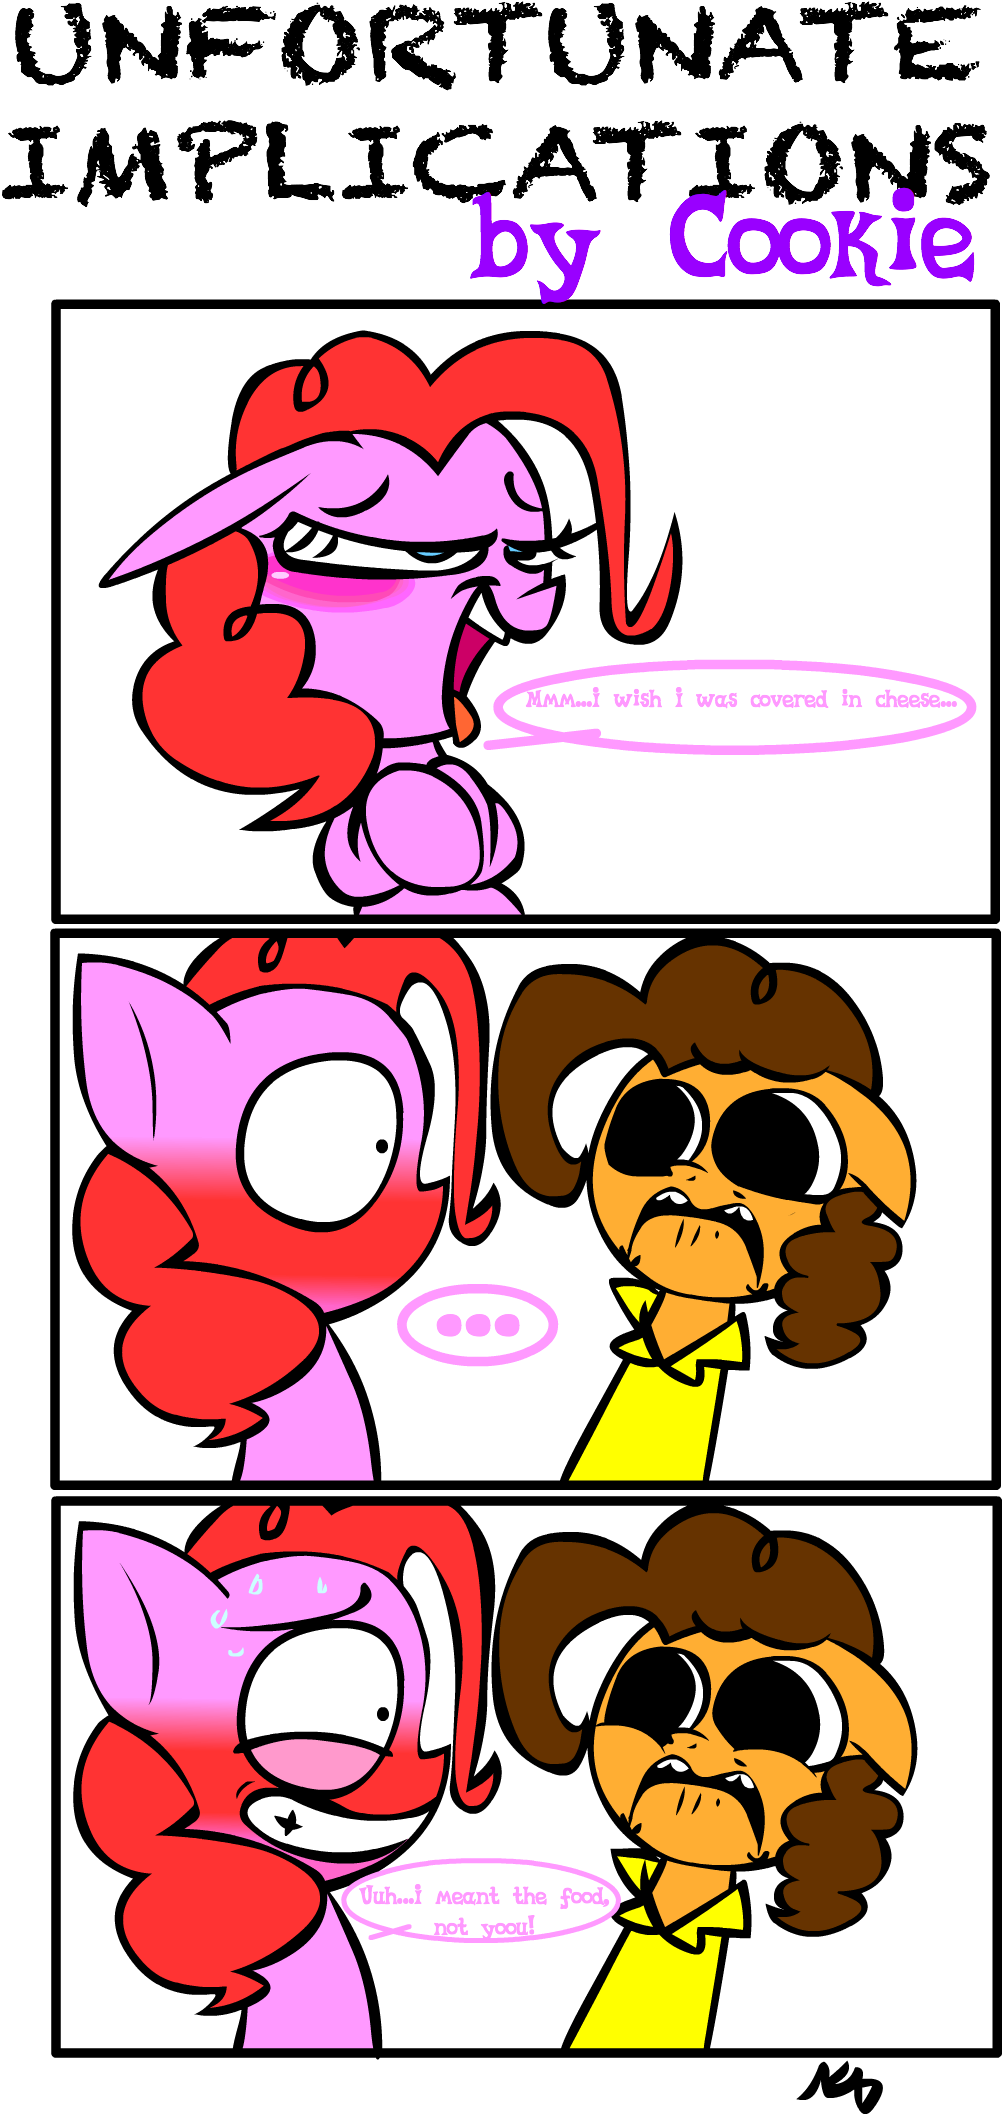 Unfortunate Implications Y Cookie Mm Wish I Was Covered - Pinkie Pie X Cheese Sandwich Comic (1006x2135)